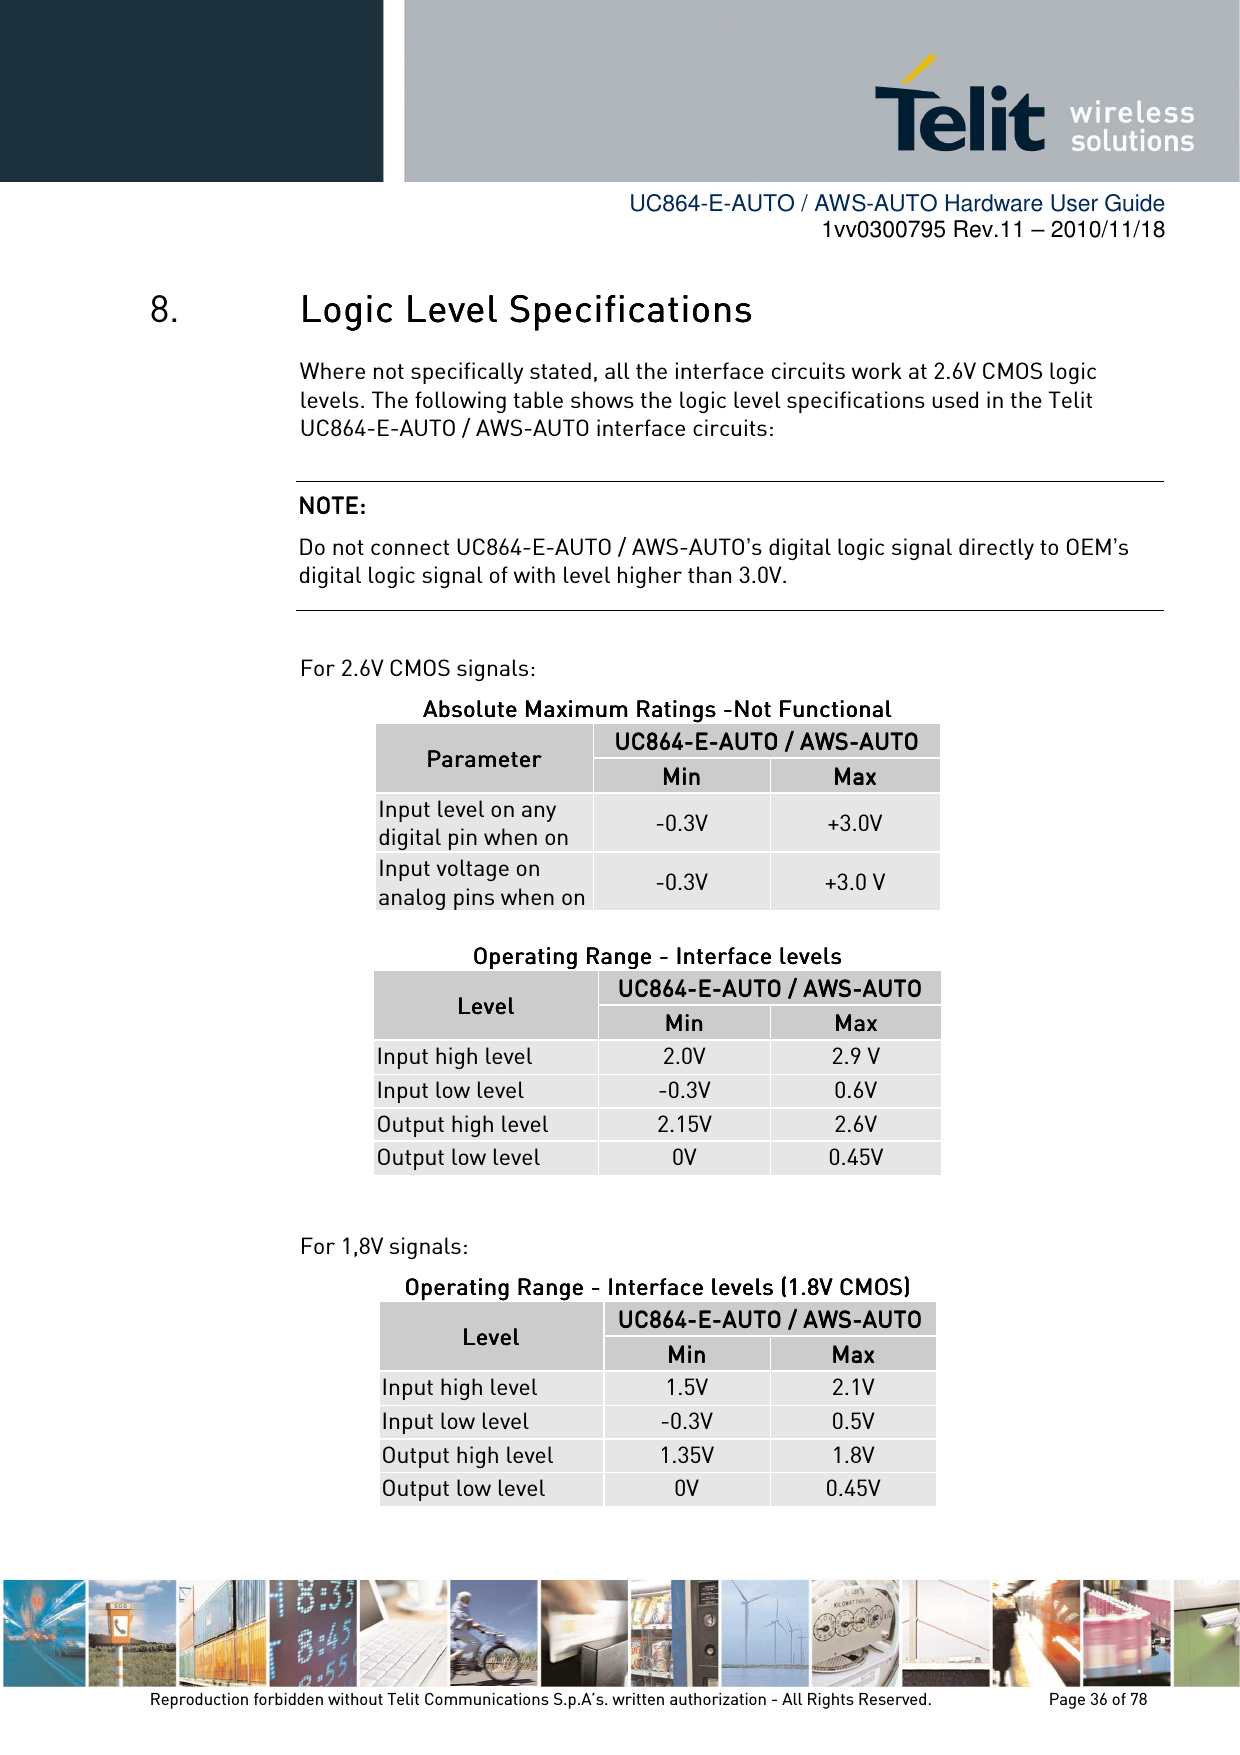        UC864-E-AUTO / AWS-AUTO Hardware User Guide 1vv0300795 Rev.11 – 2010/11/18     Reproduction forbidden without Telit Communications S.p.A’s. written authorization - All Rights Reserved.    Page 36 of 78  8. Logic LLogic LLogic LLogic Level evel evel evel SSSSpecificationspecificationspecificationspecifications    Where not specifically stated, all the interface circuits work at 2.6V CMOS logic levels. The following table shows the logic level specifications used in the Telit UC864-E-AUTO / AWS-AUTO interface circuits:  For 2.6V CMOS signals: Absolute Maximum Ratings Absolute Maximum Ratings Absolute Maximum Ratings Absolute Maximum Ratings ----Not FunctionalNot FunctionalNot FunctionalNot Functional    ParameterParameterParameterParameter    UC864UC864UC864UC864----EEEE----AUTOAUTOAUTOAUTO    / AWS/ AWS/ AWS/ AWS----AUTOAUTOAUTOAUTO    MinMinMinMin     MaxMaxMaxMax    Input level on any digital pin when on  -0.3V  +3.0V Input voltage on analog pins when on -0.3V  +3.0 V  OpeOpeOpeOperating Range rating Range rating Range rating Range ----    Interface levelsInterface levelsInterface levelsInterface levels    LevelLevelLevelLevel    UC864UC864UC864UC864----EEEE----AUTOAUTOAUTOAUTO    / AWS/ AWS/ AWS/ AWS----AUTOAUTOAUTOAUTO    MinMinMinMin     MaxMaxMaxMax    Input high level  2.0V  2.9 V Input low level  -0.3V  0.6V Output high level  2.15V  2.6V Output low level  0V  0.45V  For 1,8V signals: Operating Range Operating Range Operating Range Operating Range ----    Interface levels (1.8V CMOS)Interface levels (1.8V CMOS)Interface levels (1.8V CMOS)Interface levels (1.8V CMOS)    LevLevLevLevelelelel    UC864UC864UC864UC864----EEEE----AUTOAUTOAUTOAUTO    / AWS/ AWS/ AWS/ AWS----AUTOAUTOAUTOAUTO    MinMinMinMin     MaxMaxMaxMax    Input high level  1.5V  2.1V Input low level  -0.3V  0.5V Output high level  1.35V  1.8V Output low level  0V  0.45V NOTE: NOTE: NOTE: NOTE:     Do not connect UC864-E-AUTO / AWS-AUTO’s digital logic signal directly to OEM’s digital logic signal of with level higher than 3.0V. 